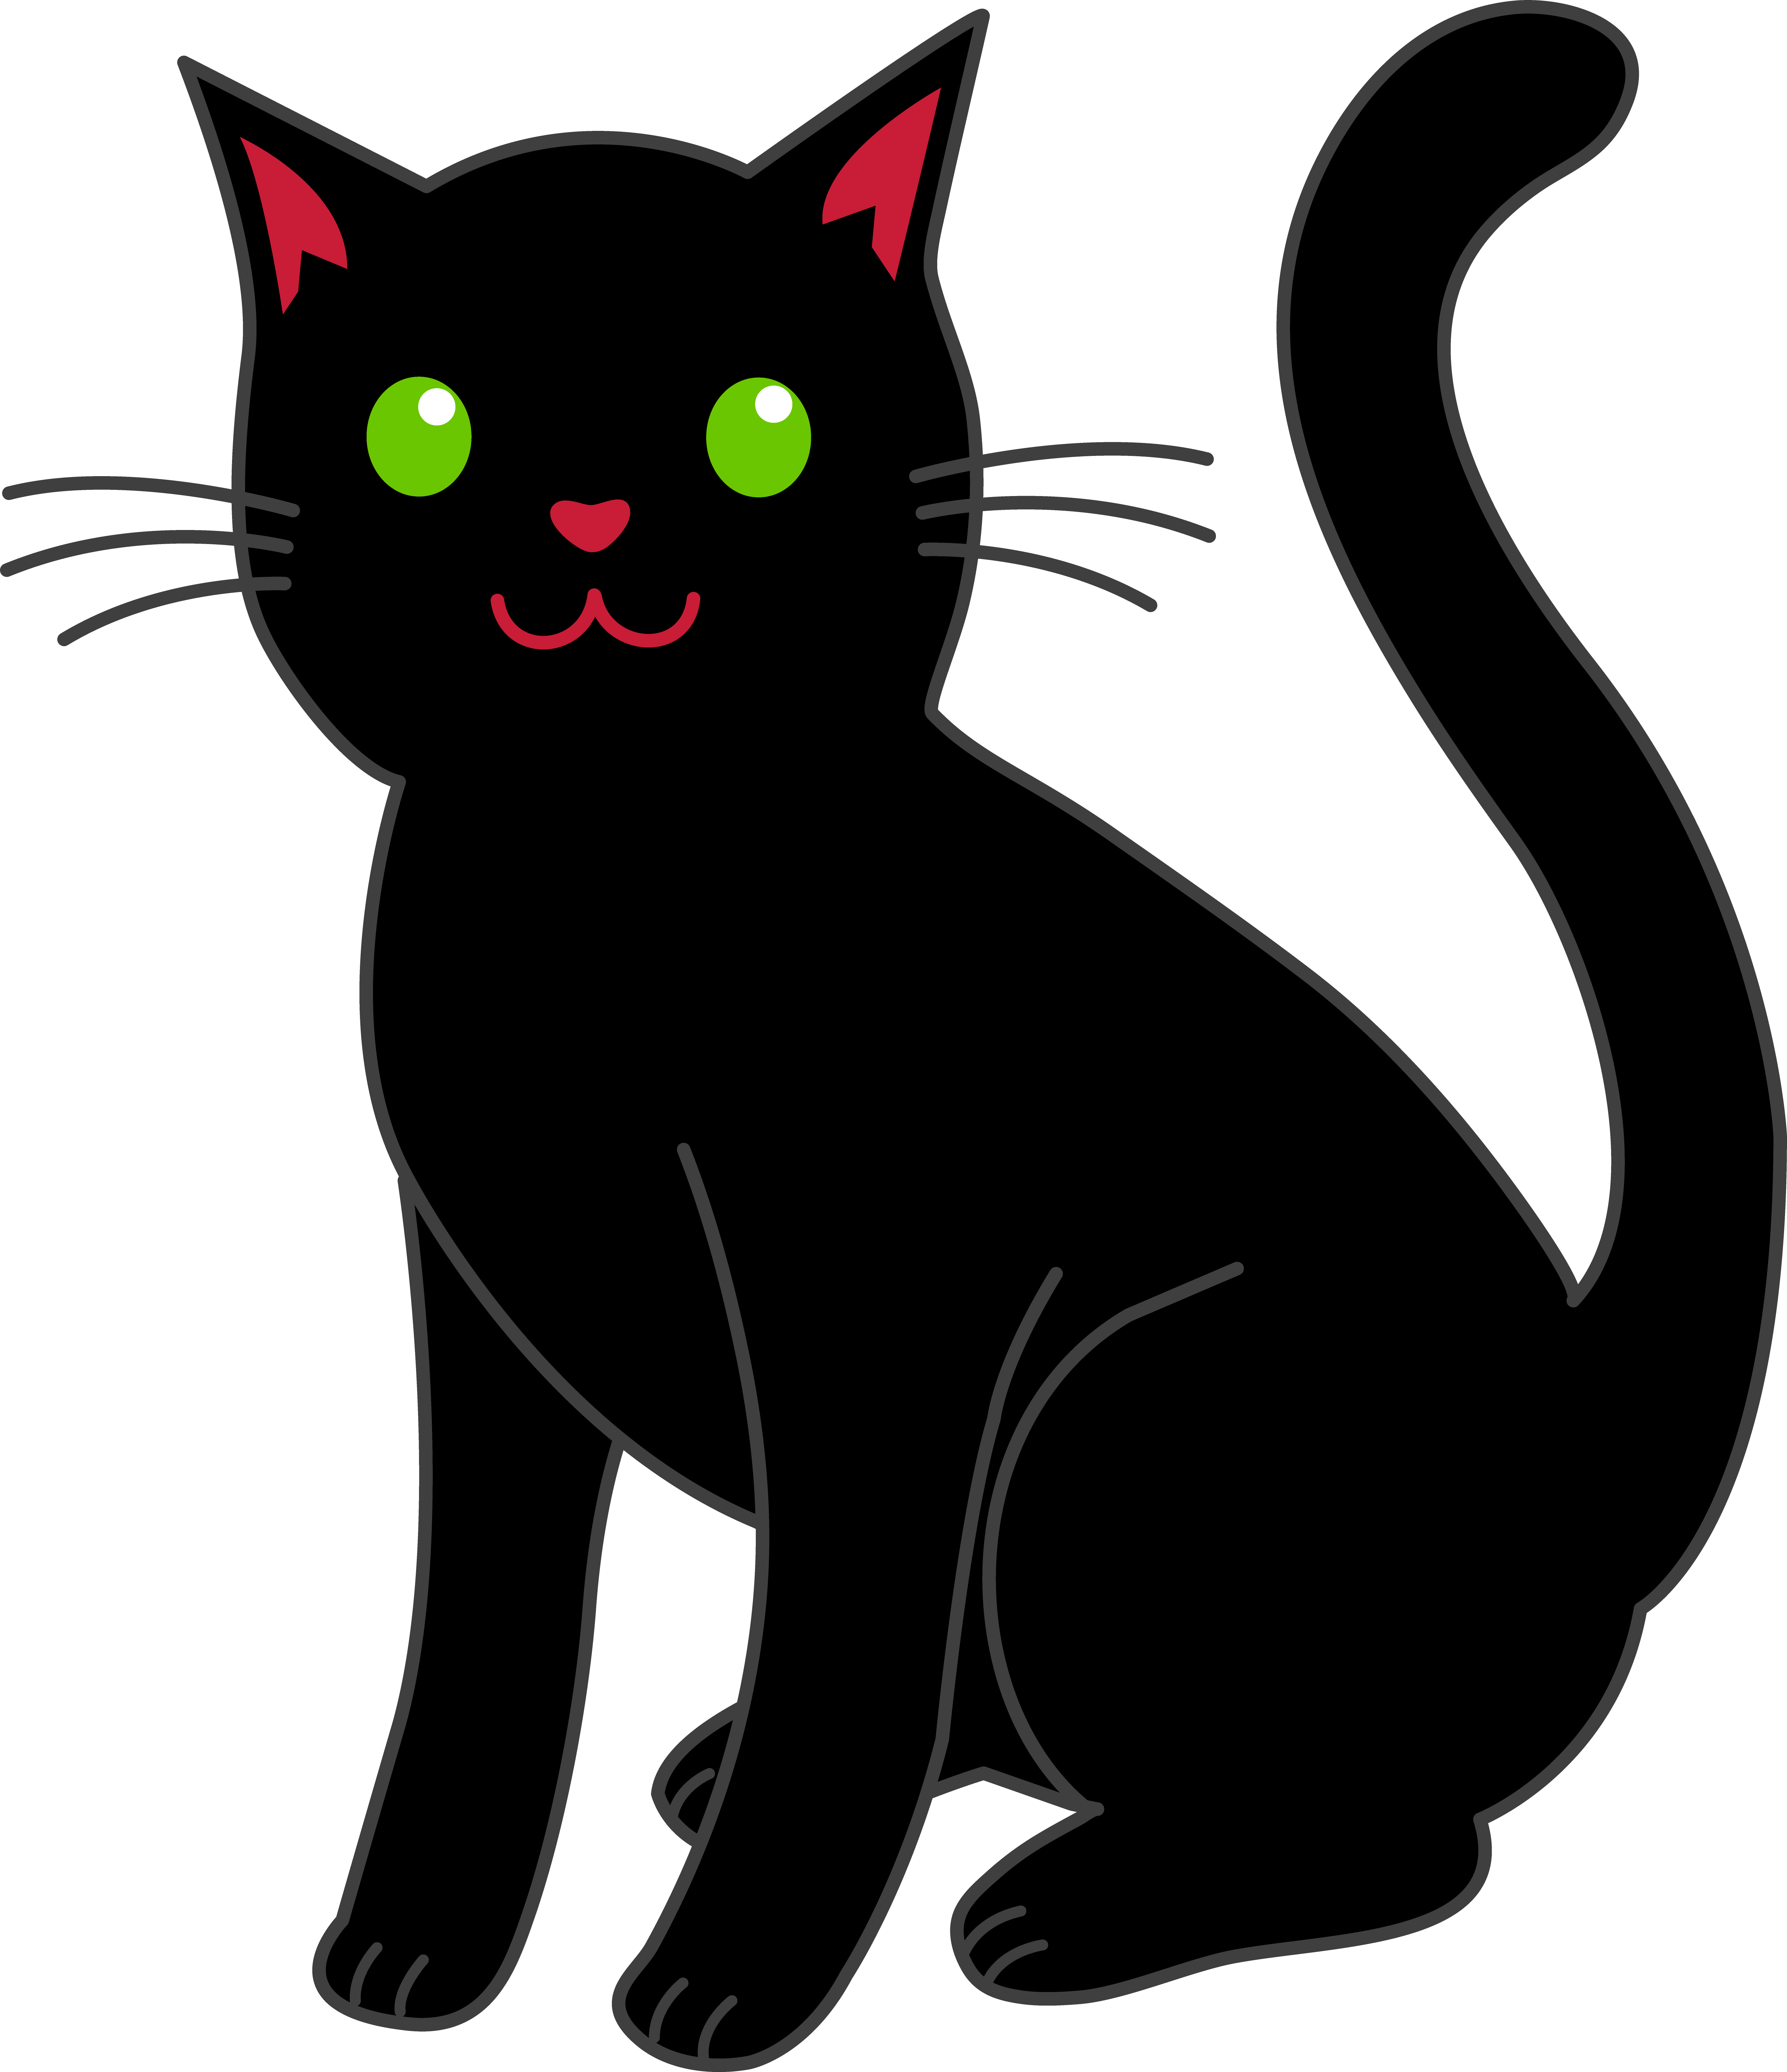 Black cat clip art free | Clipart library - Free Clipart Images